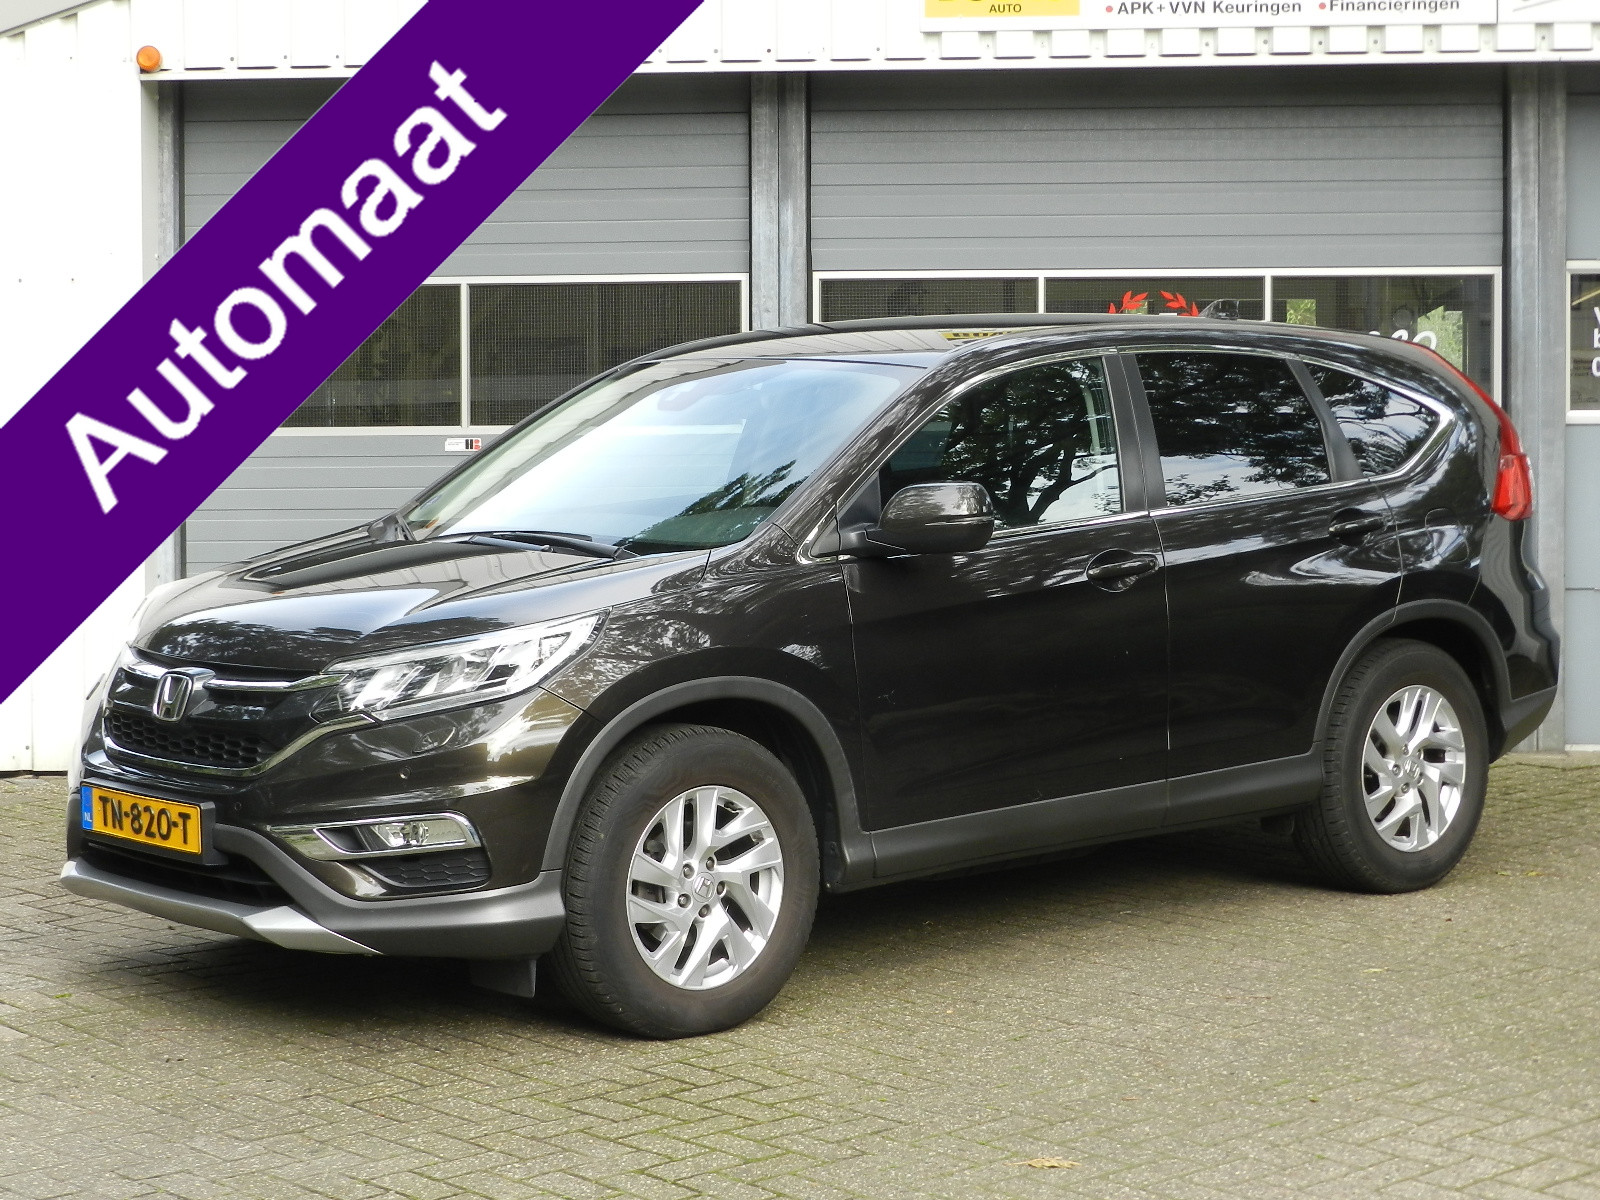 Honda CR-V 2.0 4WD Lifestyle Automaat Climate en Cruise contr PDC Camera